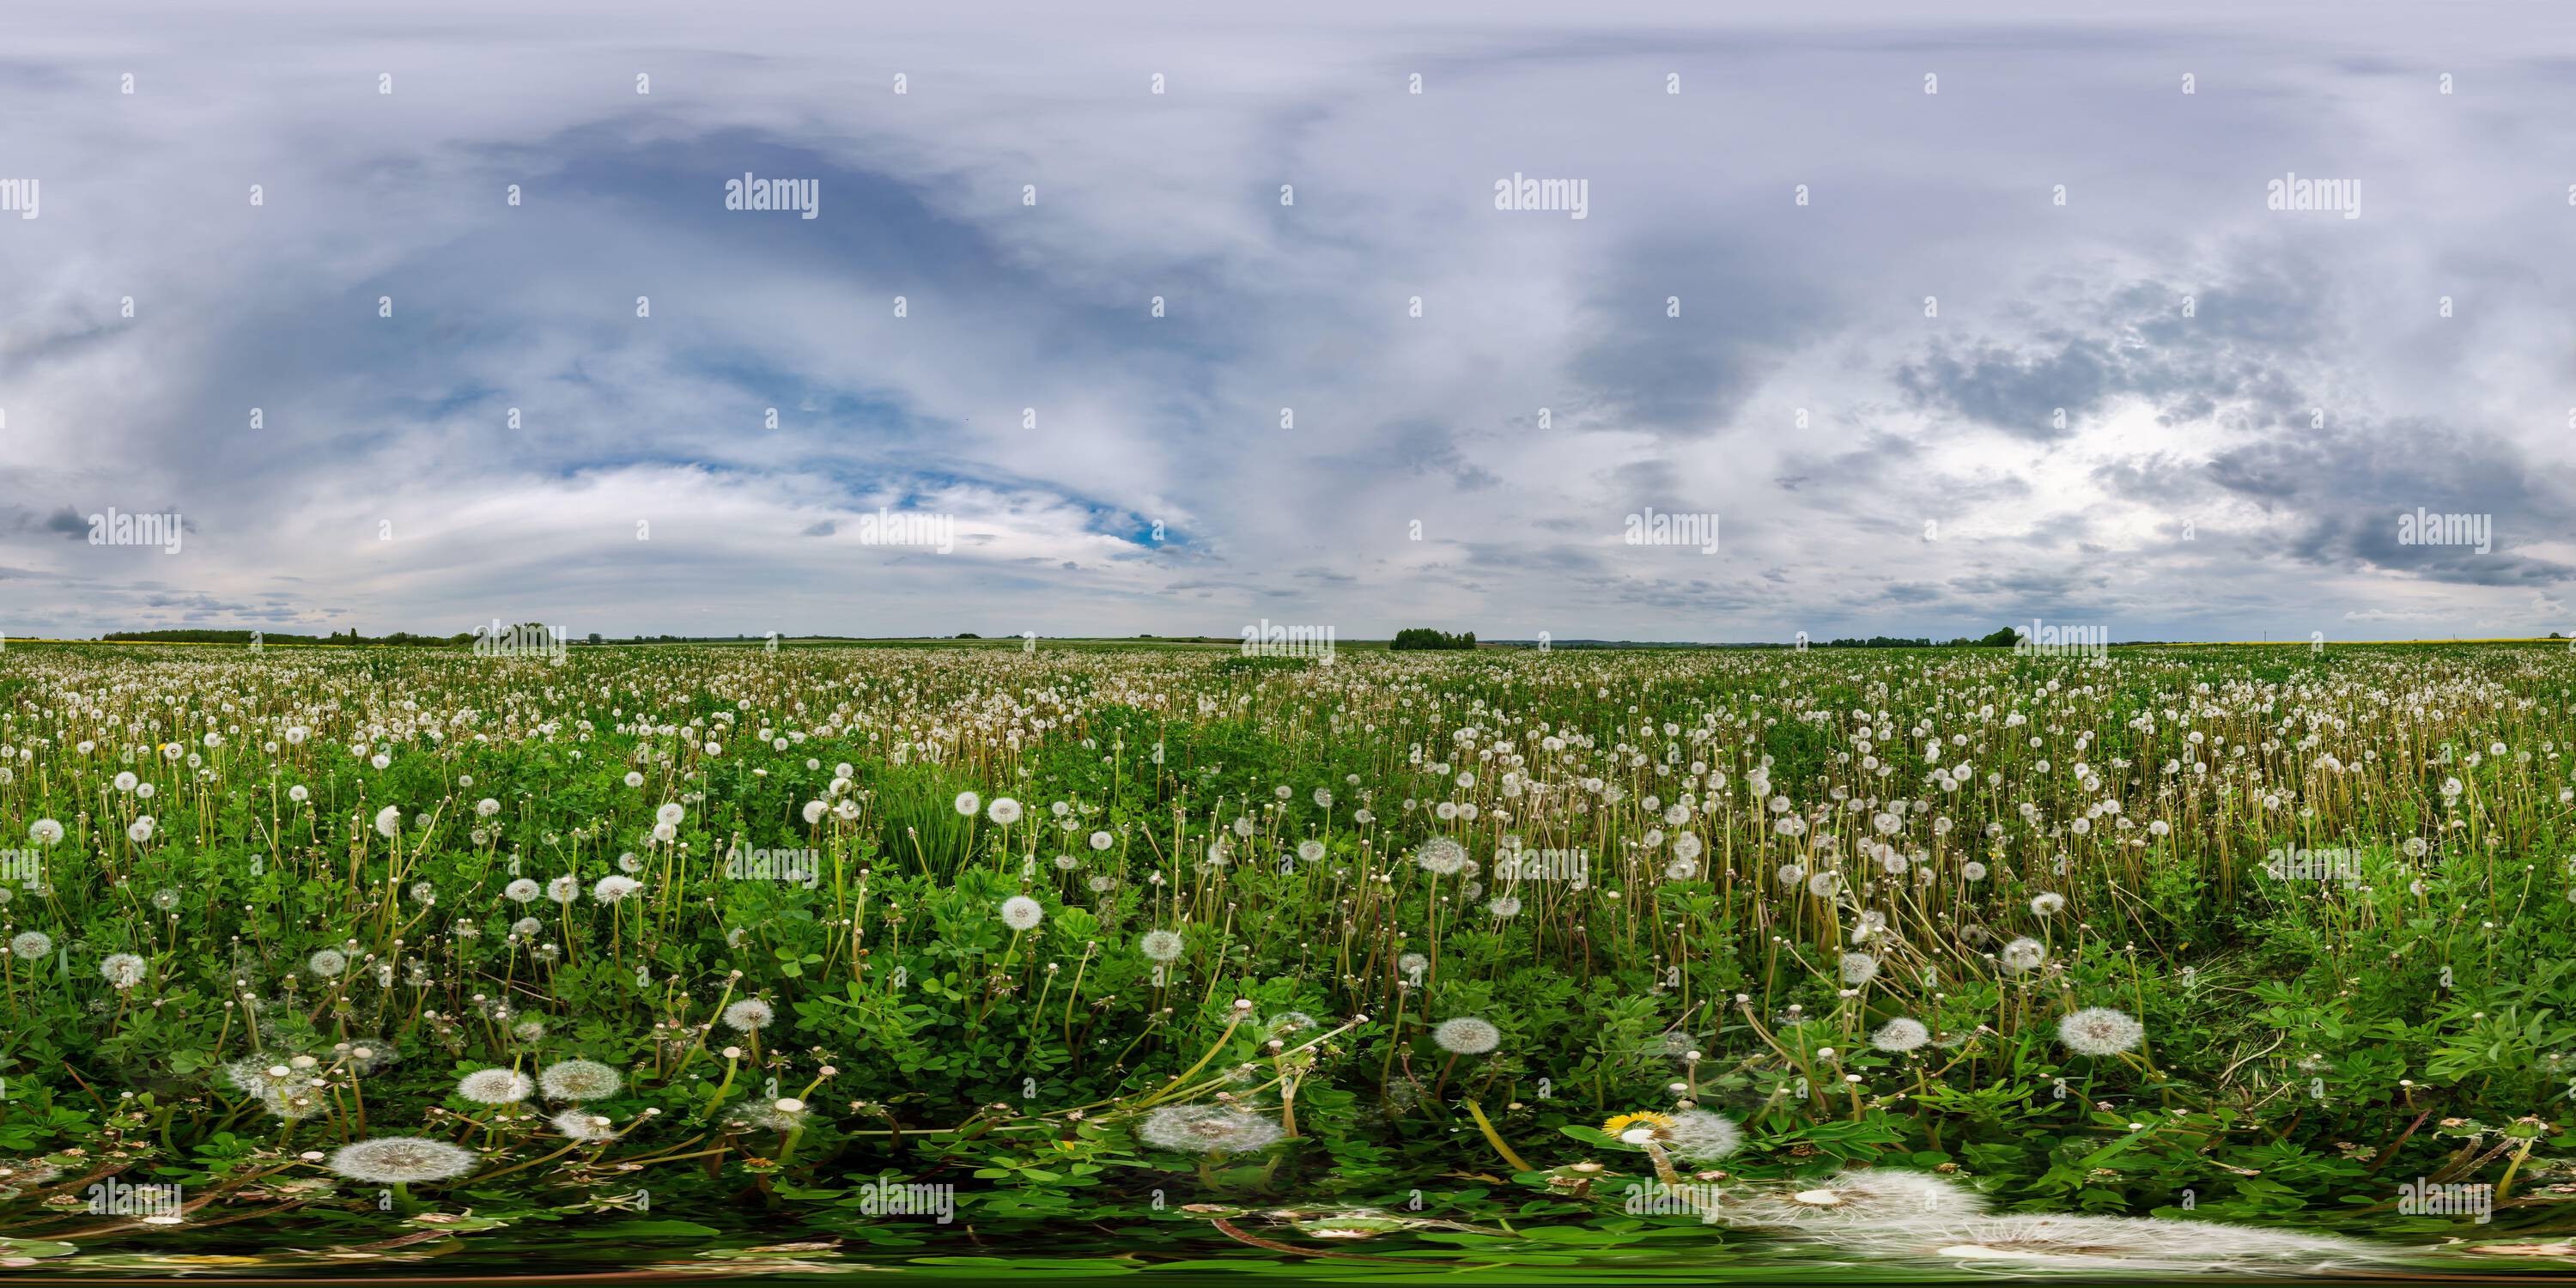 360 degree panoramic view of full seamless spherical 360 hdri panorama view among dandelions fields in spring day with overcast sky in equirectangular projection, ready for VR AR